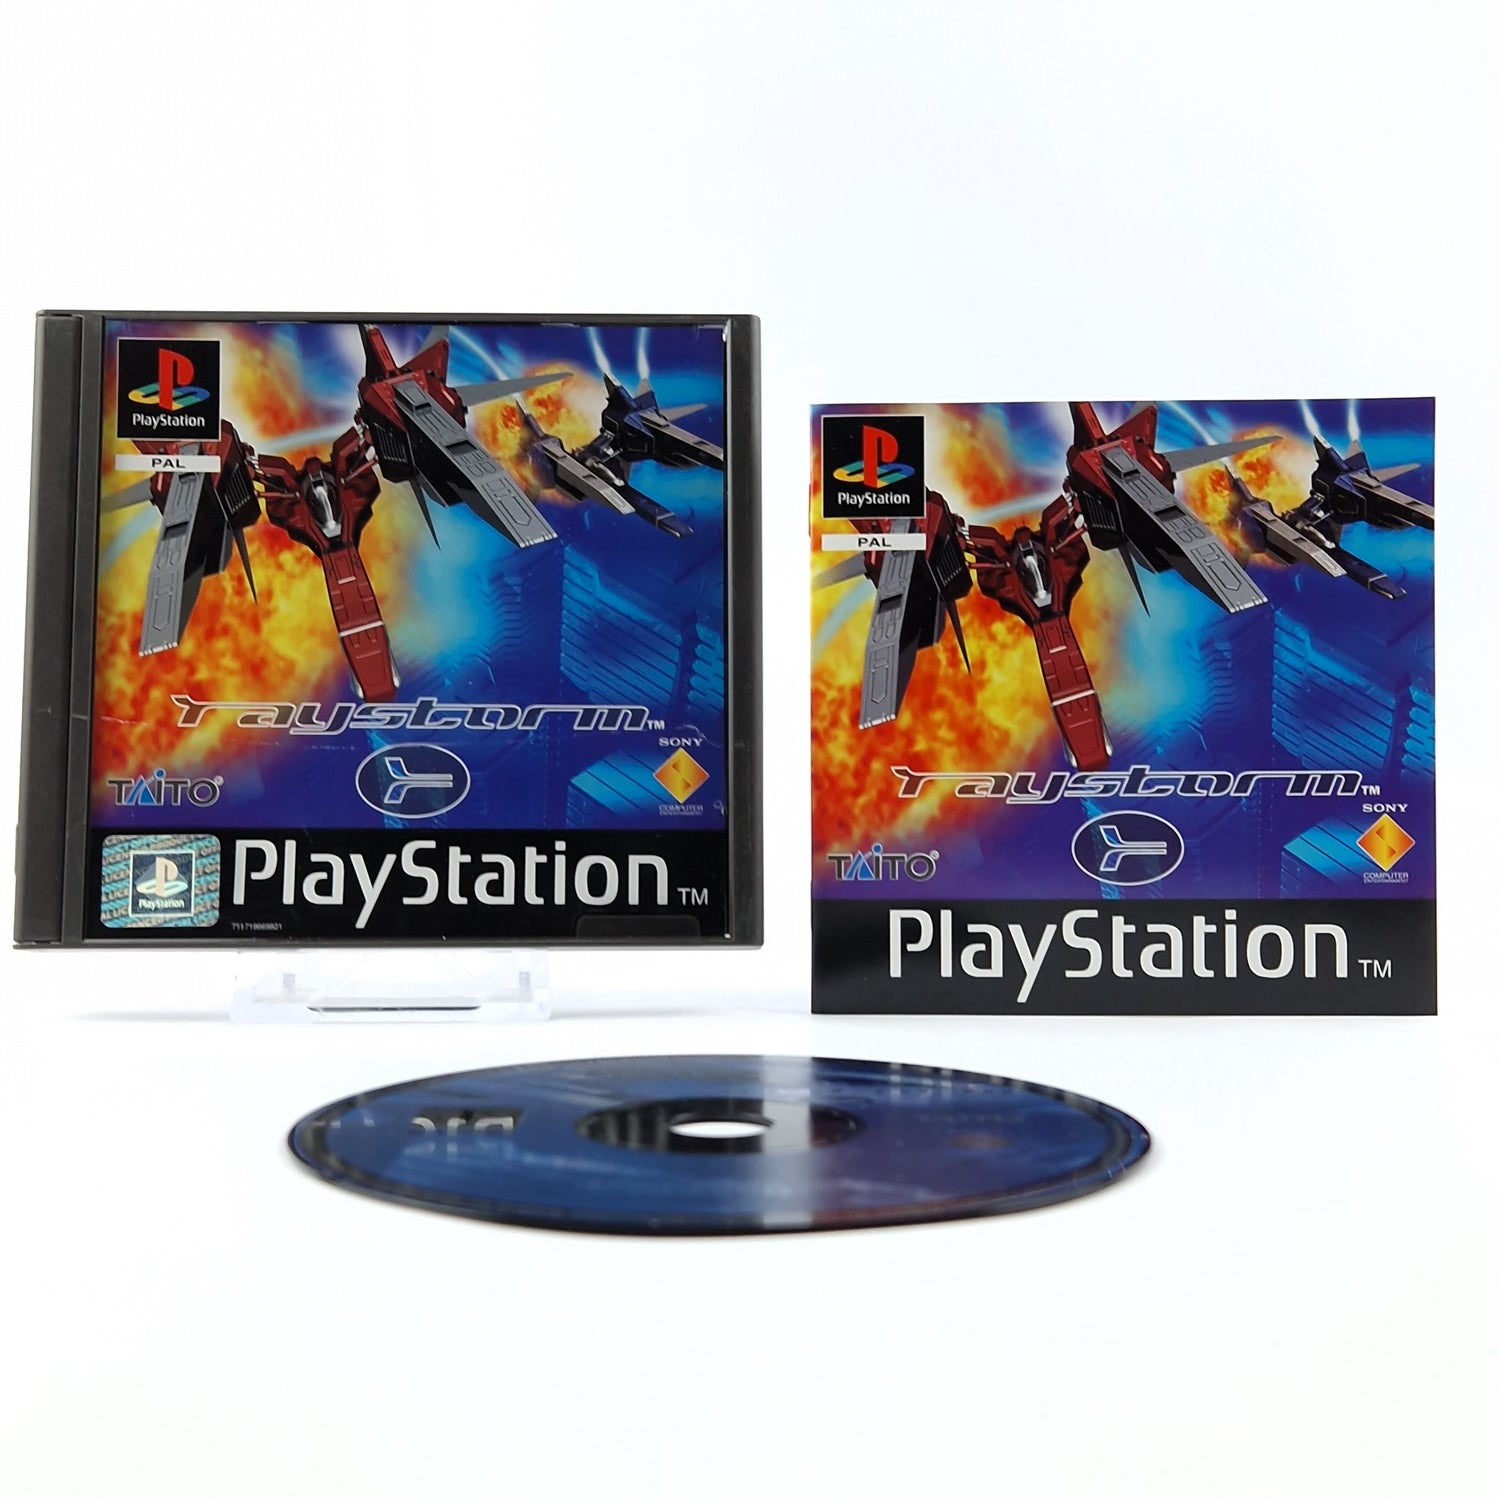 Playstation 1 game: Raystorm - CD instructions OVP | SONY PS1 PSX PAL